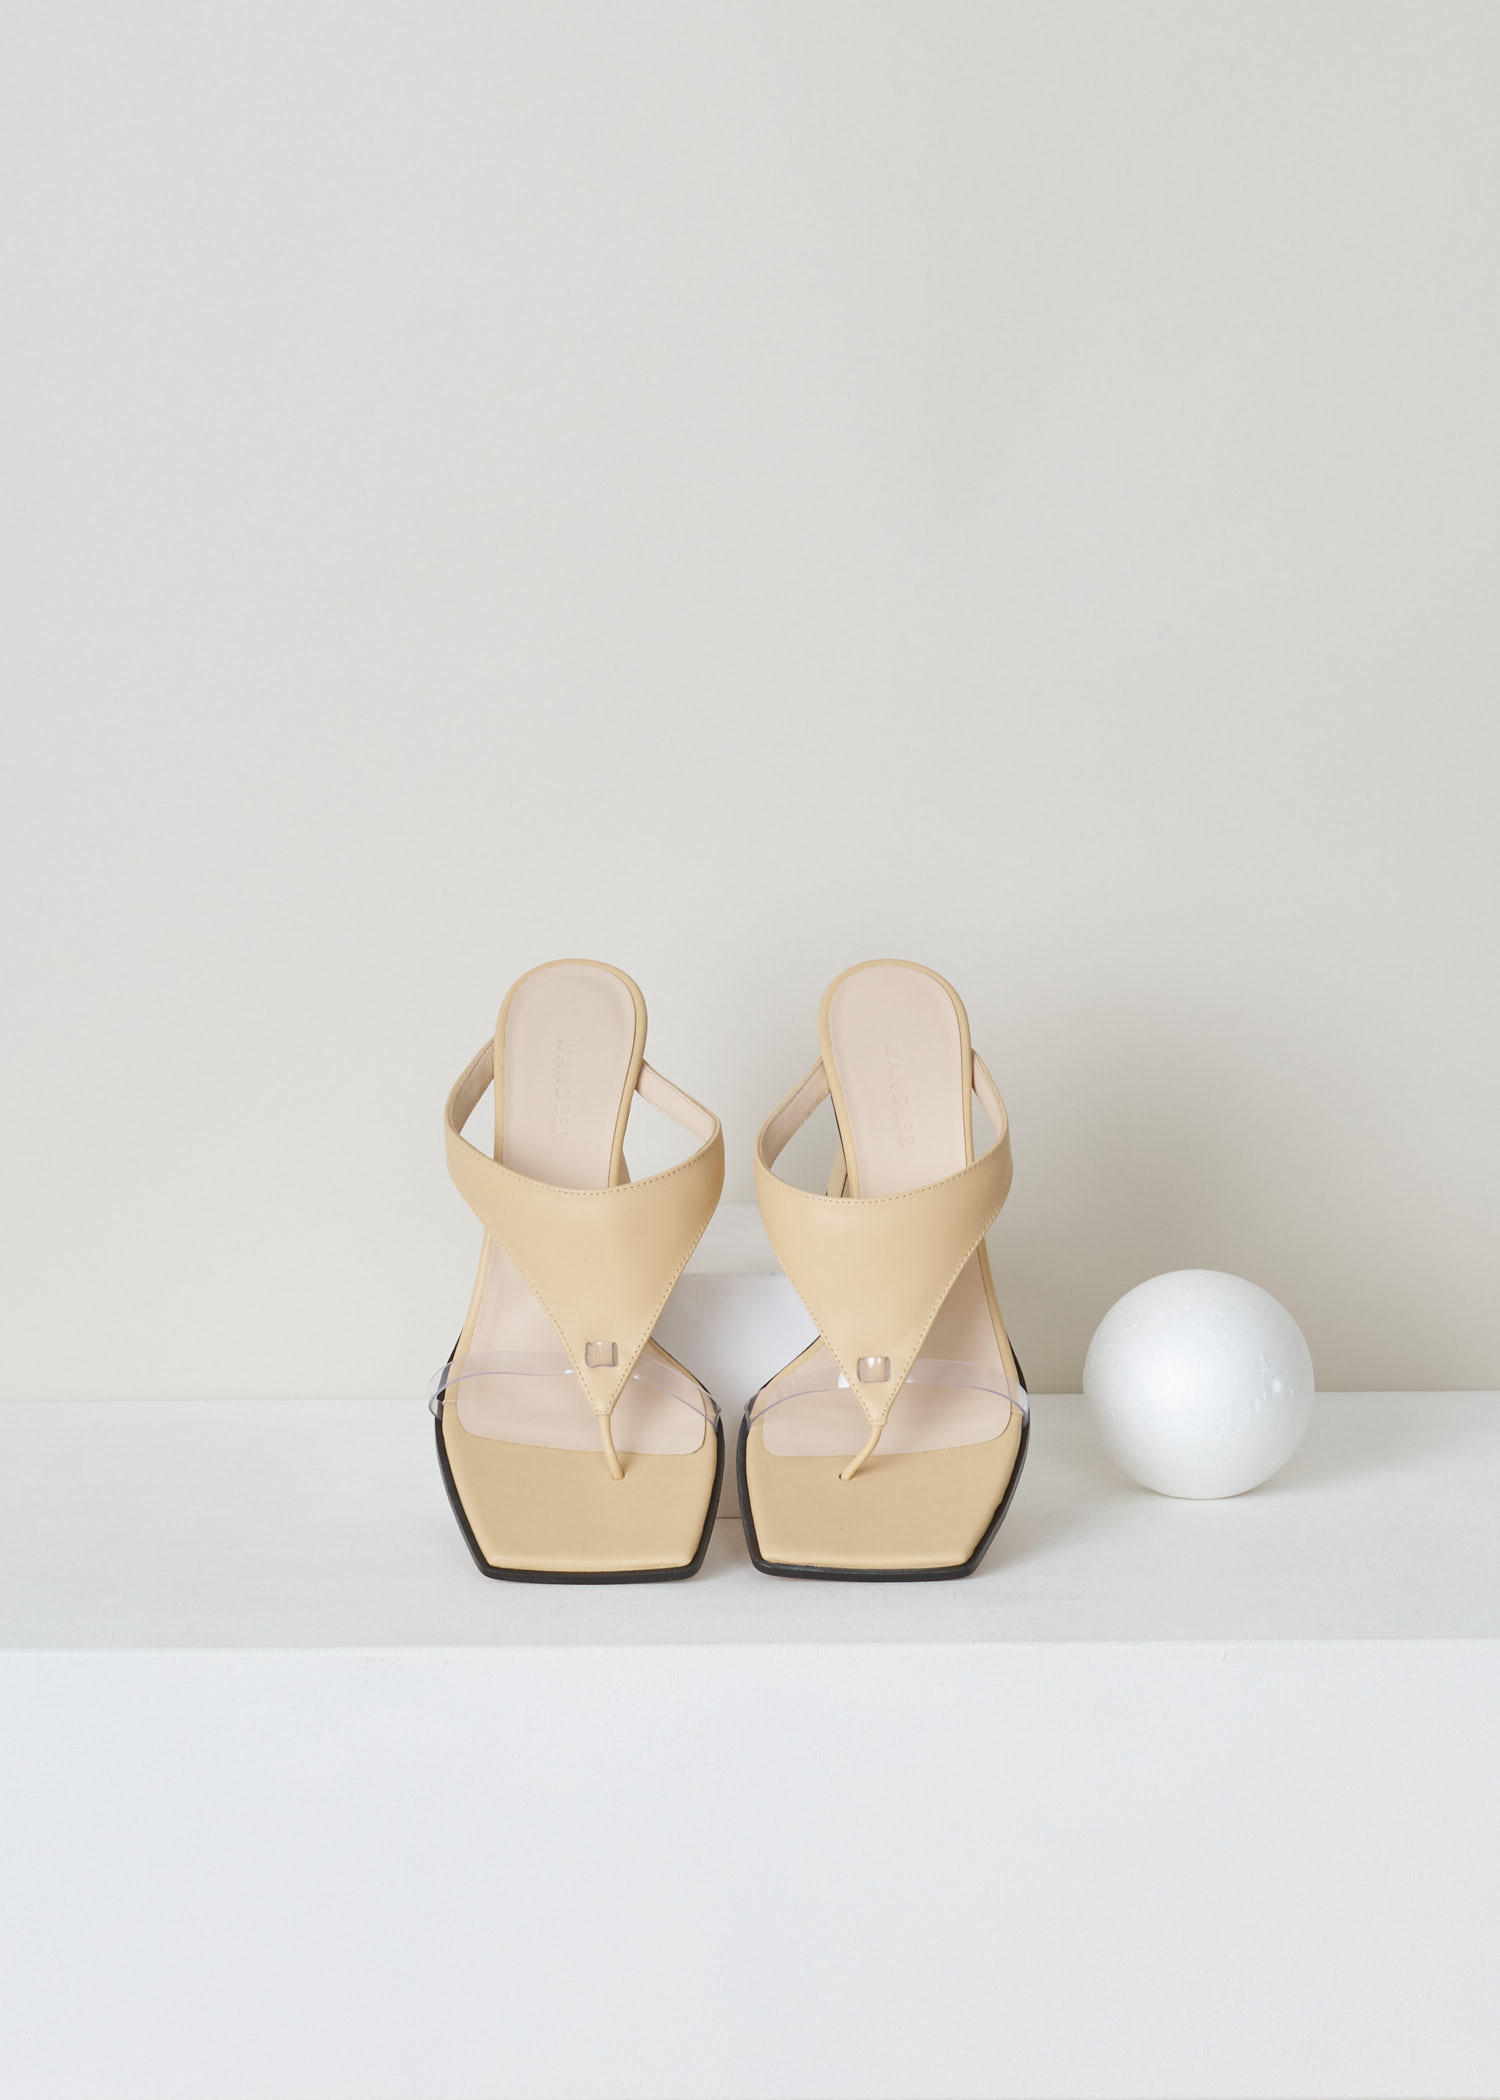 Wandler, Lambskin cashew sandal, Feline_Sandal_Lambskin_Leather_Cashew, beige, top, Lambskin mules, comes in cashew color. Featuring square-cut open toes and lightly padded straps for extra comfort.